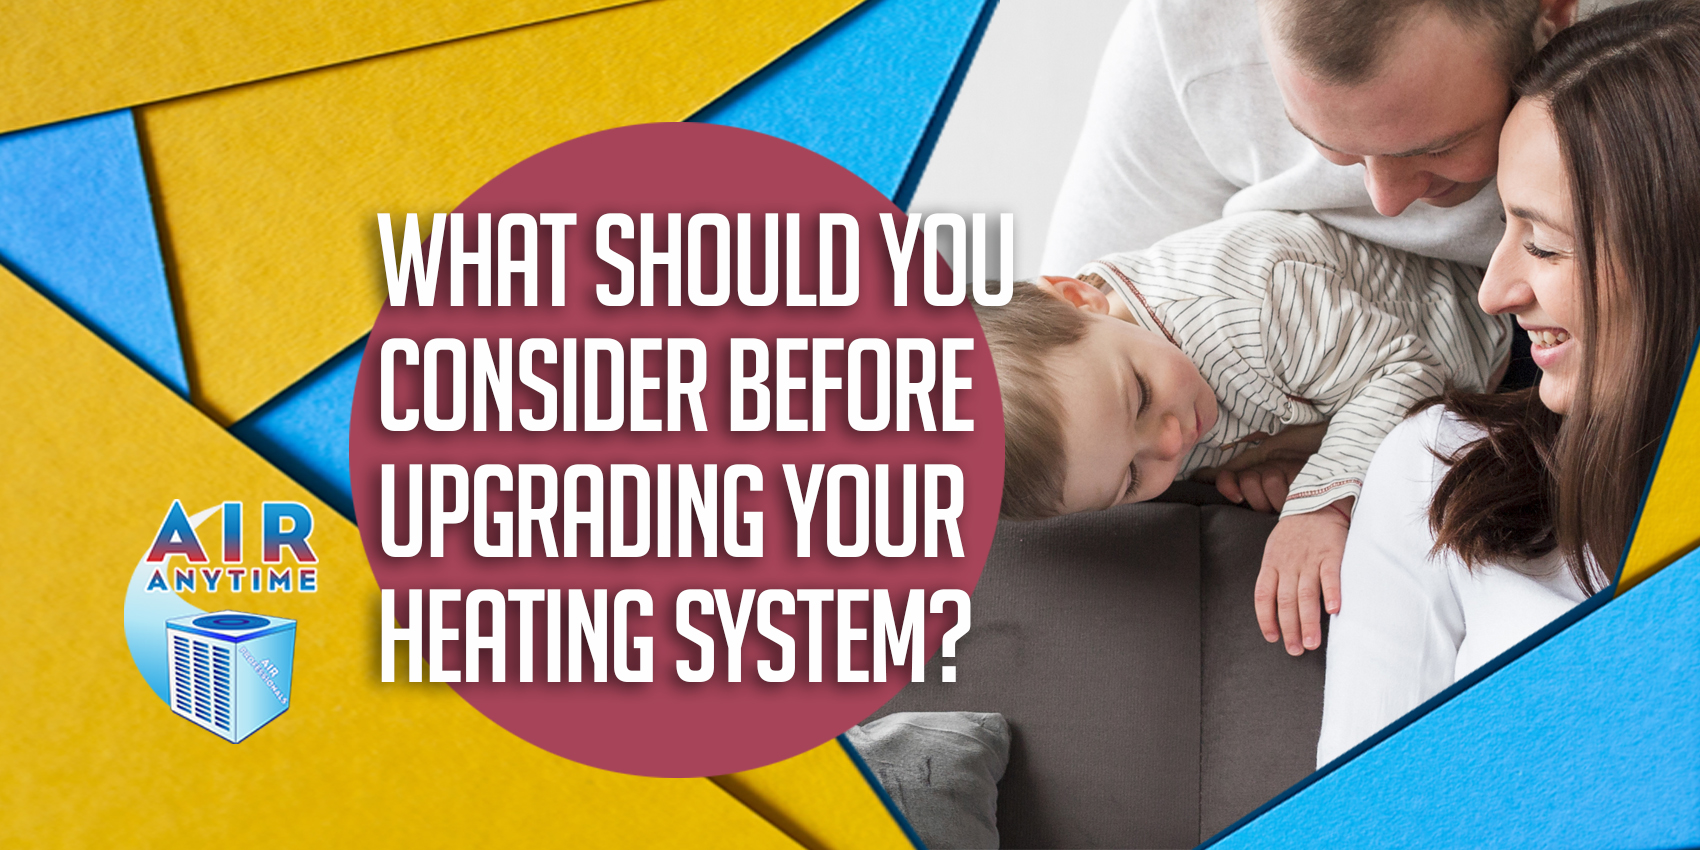 What Should You Consider Before Upgrading Your Heating System?